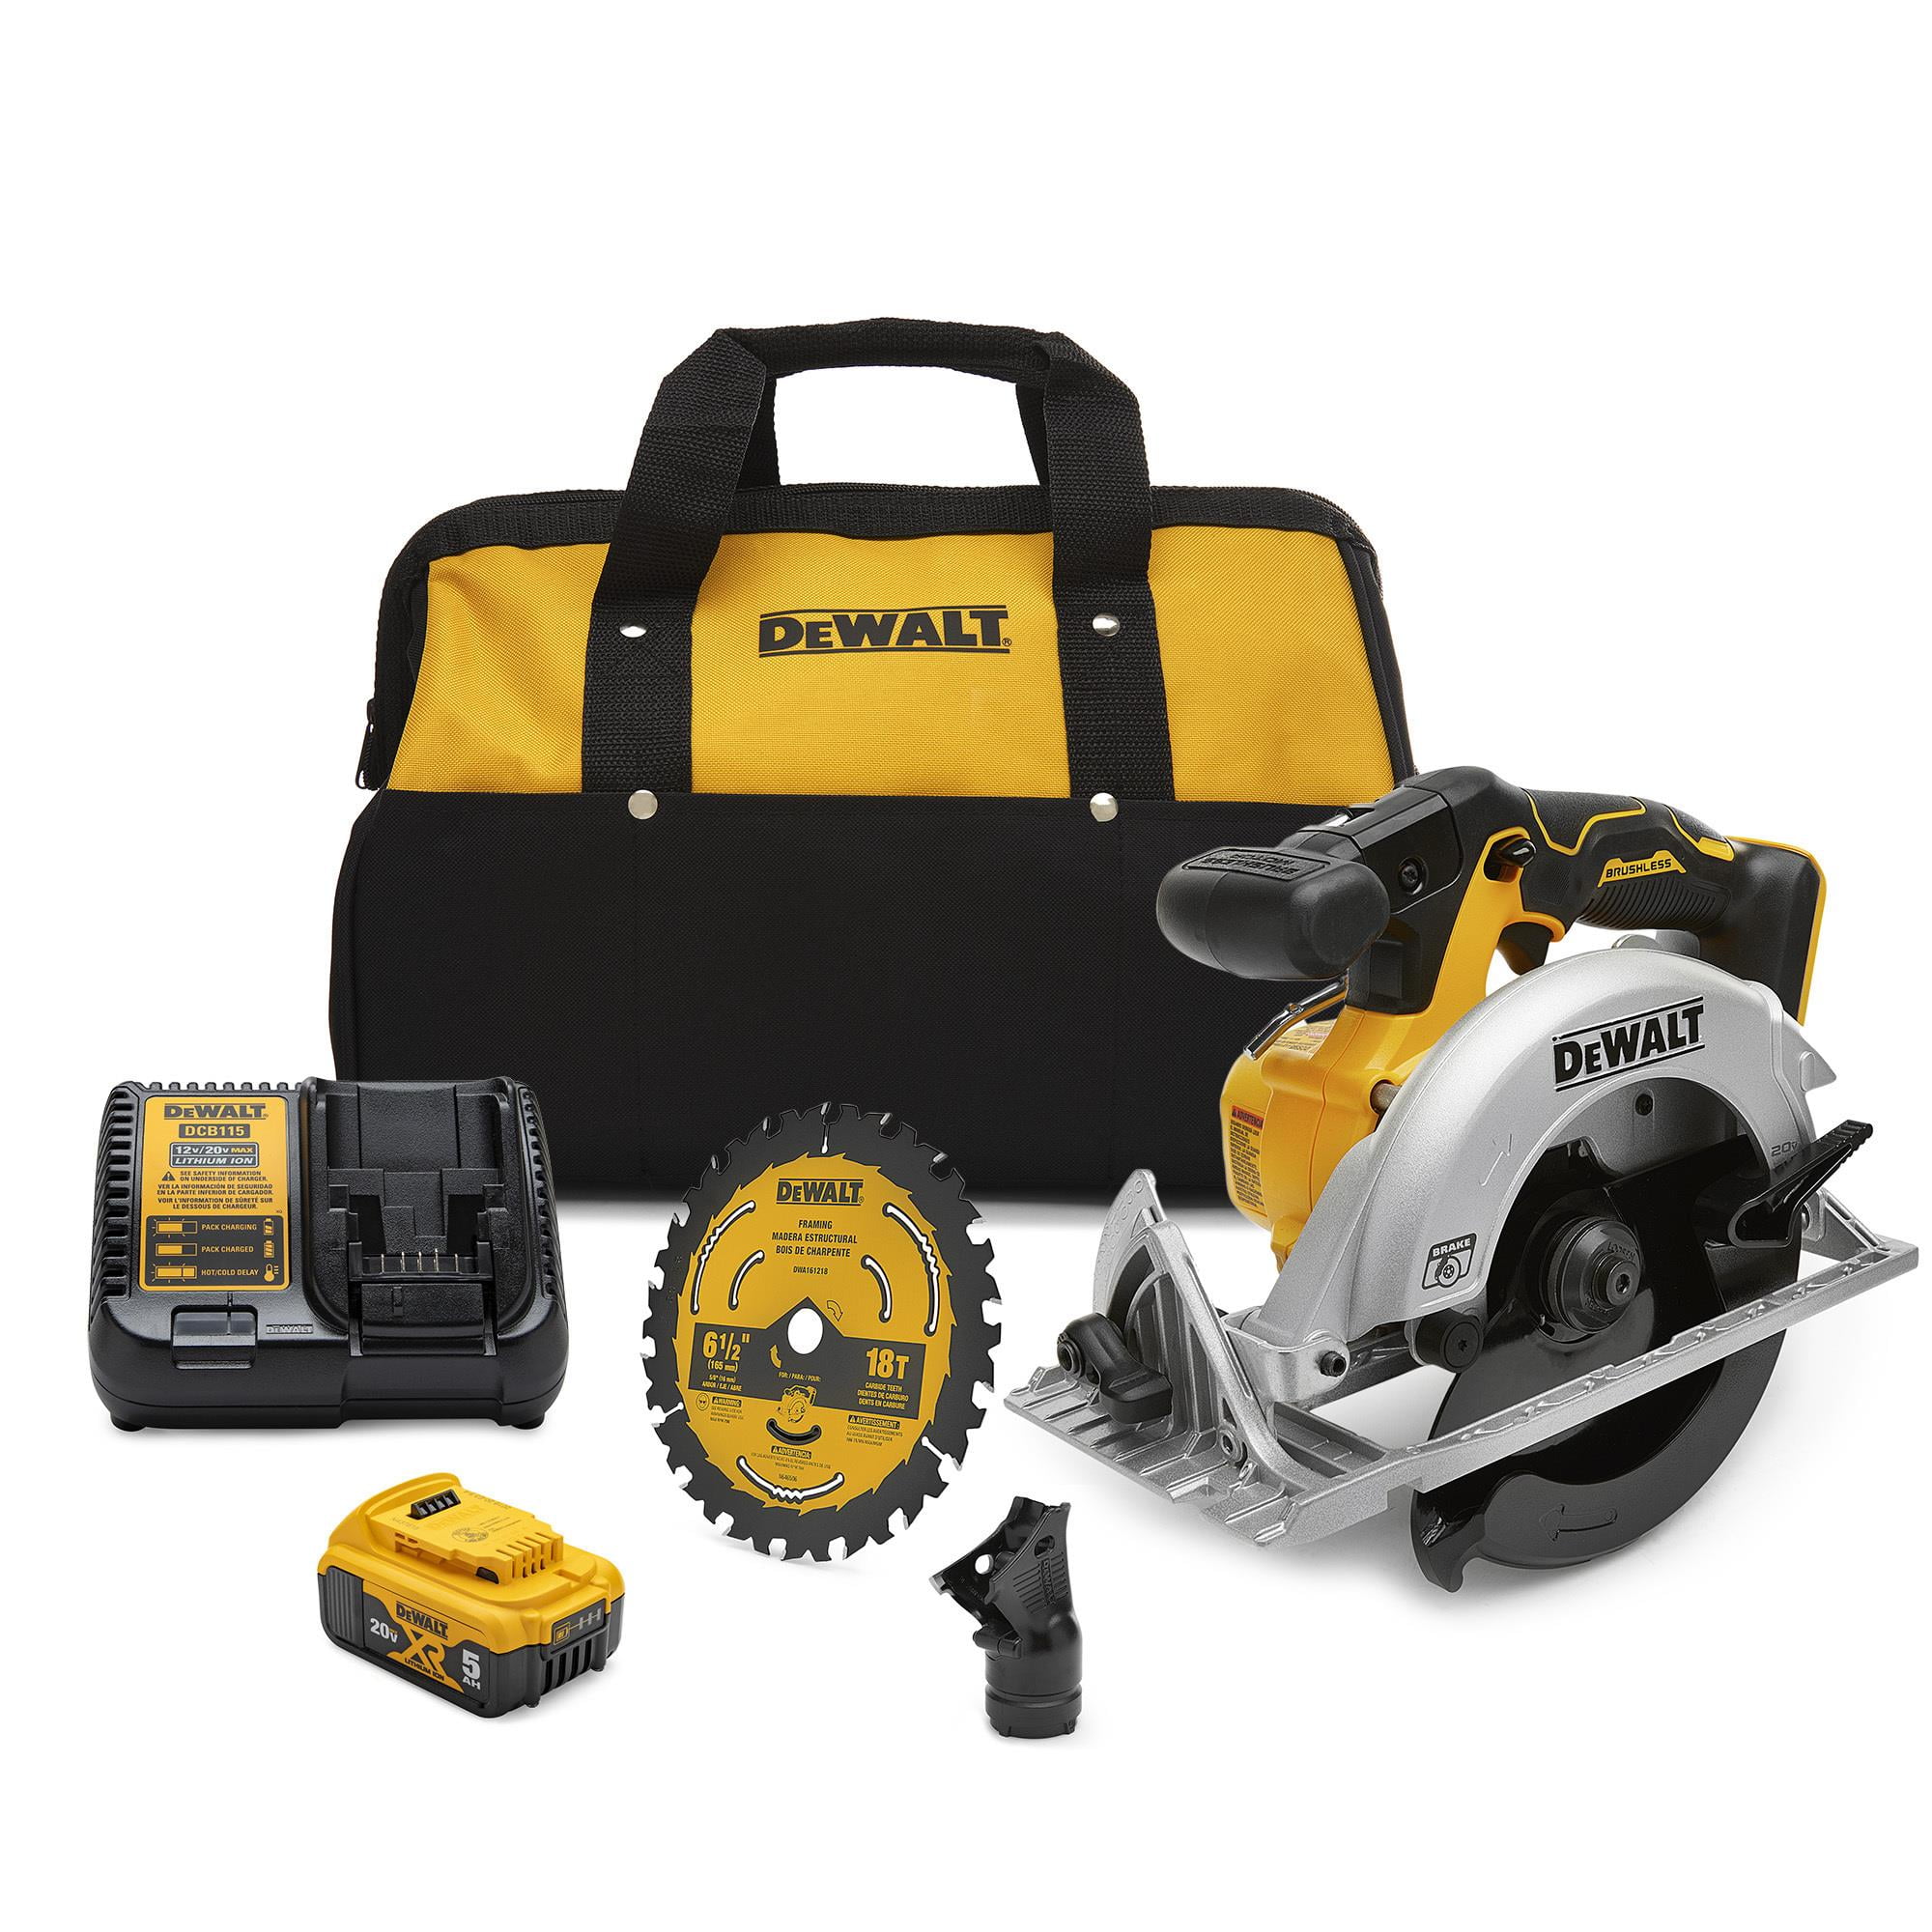 DEWALT 20-volt Max 5-1/2-in Cordless Circular Saw Kit Circular Saw  (2-Batteries And Charger Included)